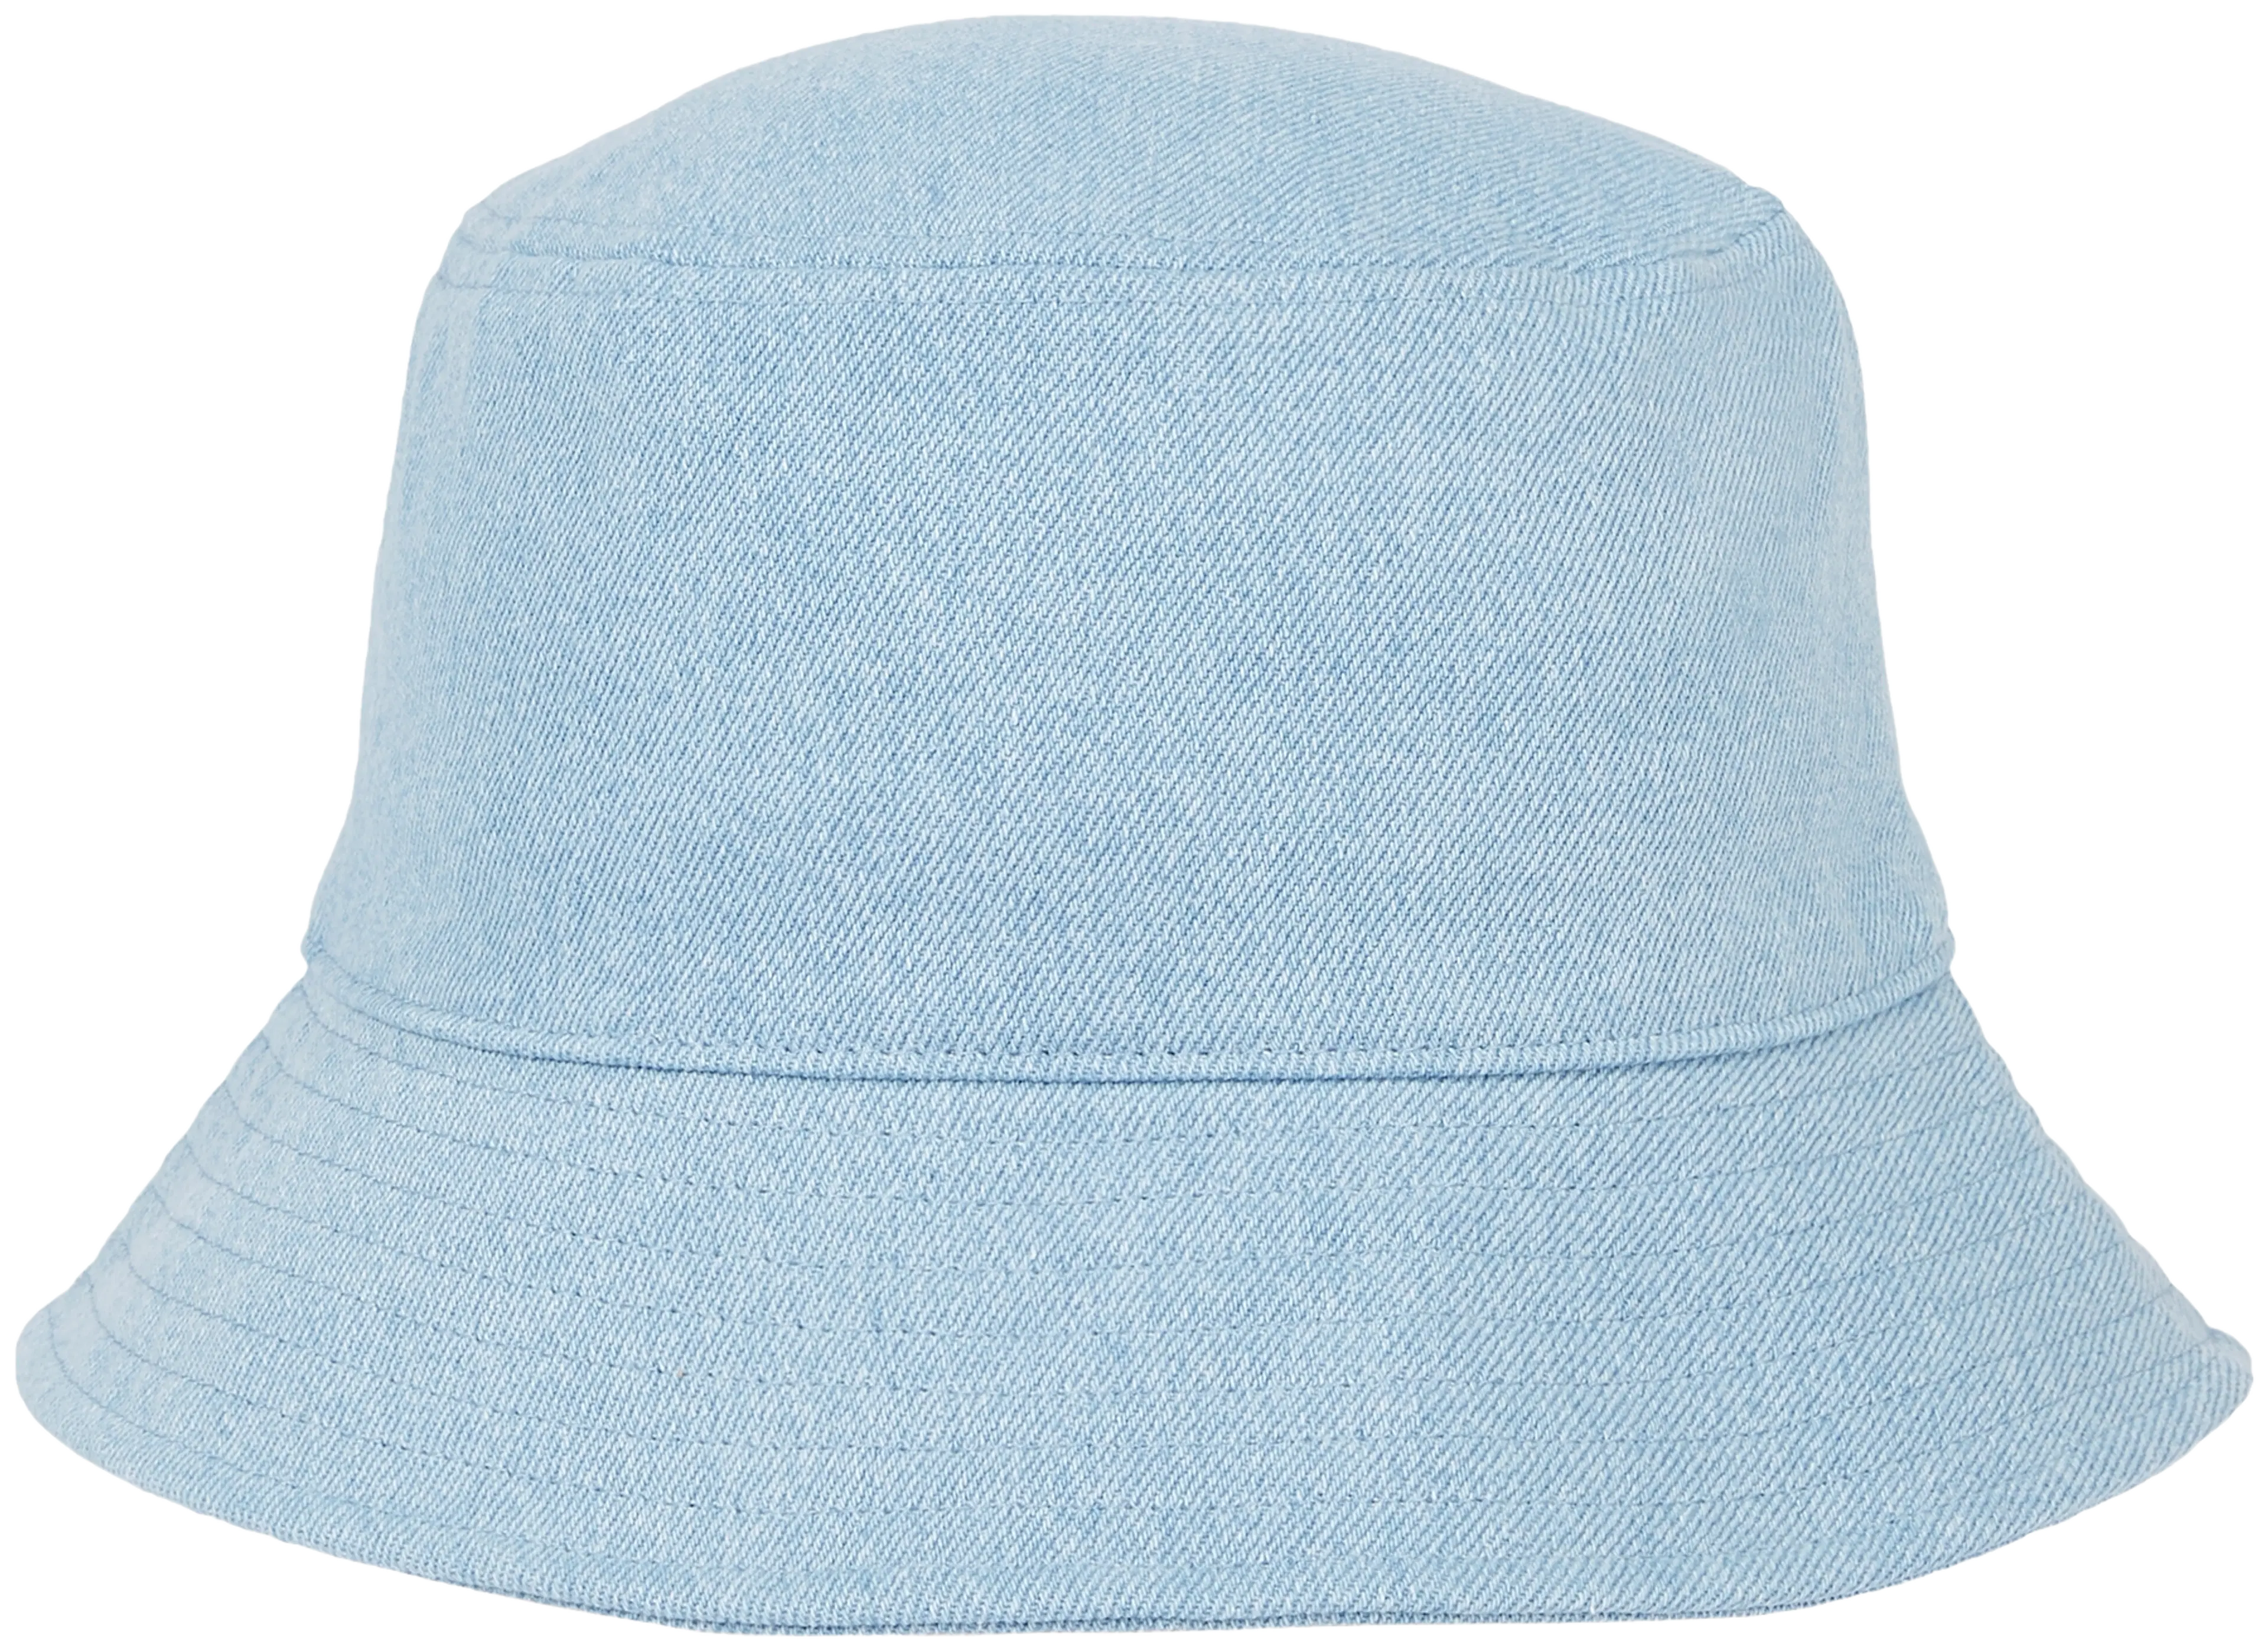 Tommy Jeans buckethat